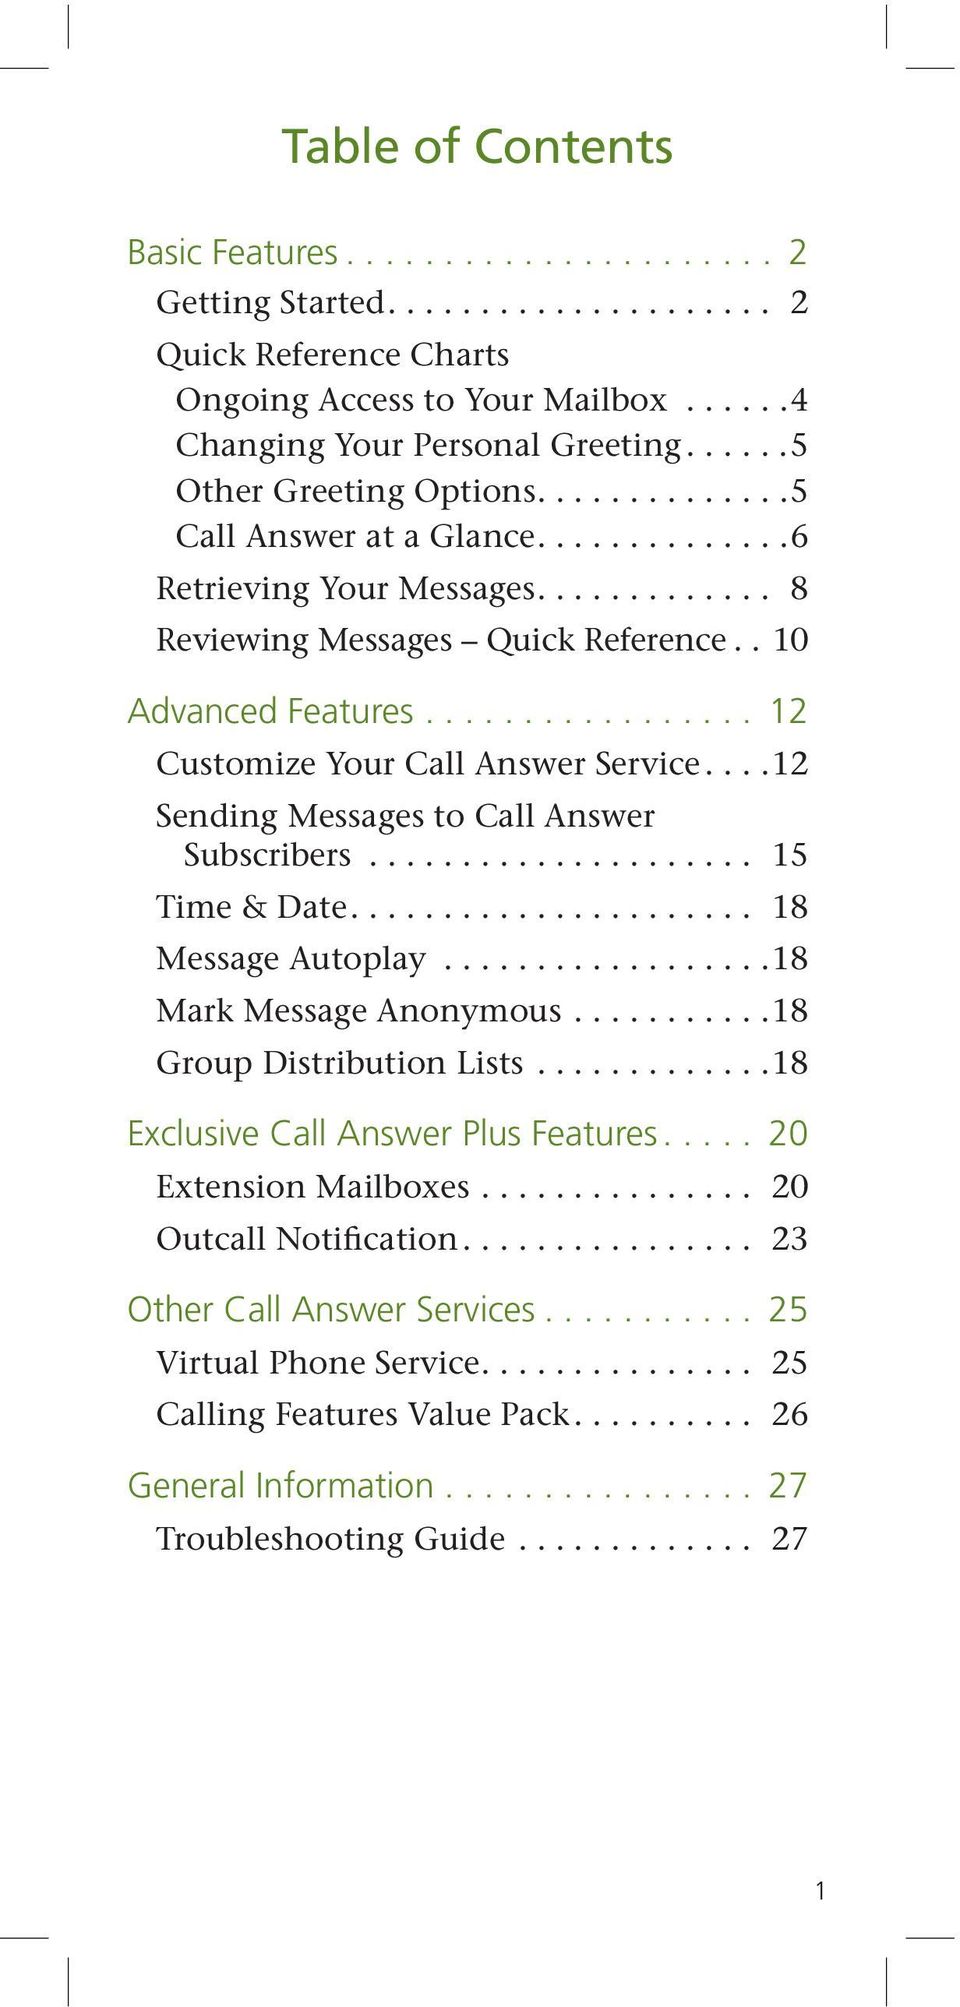 ................ 12 Customize Your Call Answer Service....12 Sending Messages to Call Answer Subscribers..................... 15 Time & Date...................... 18 Message Autoplay.